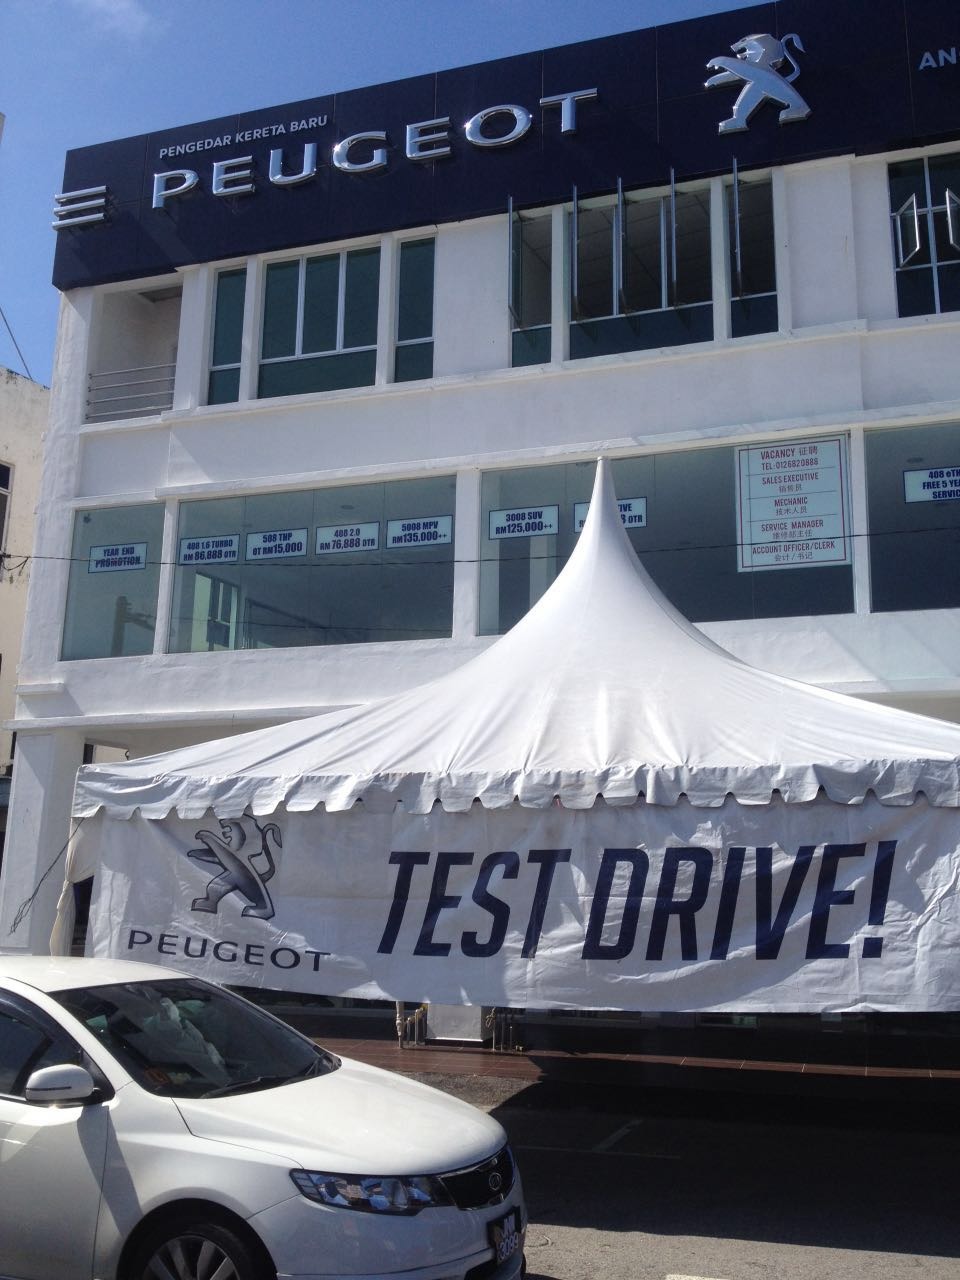 TEST DRIVE EVENT